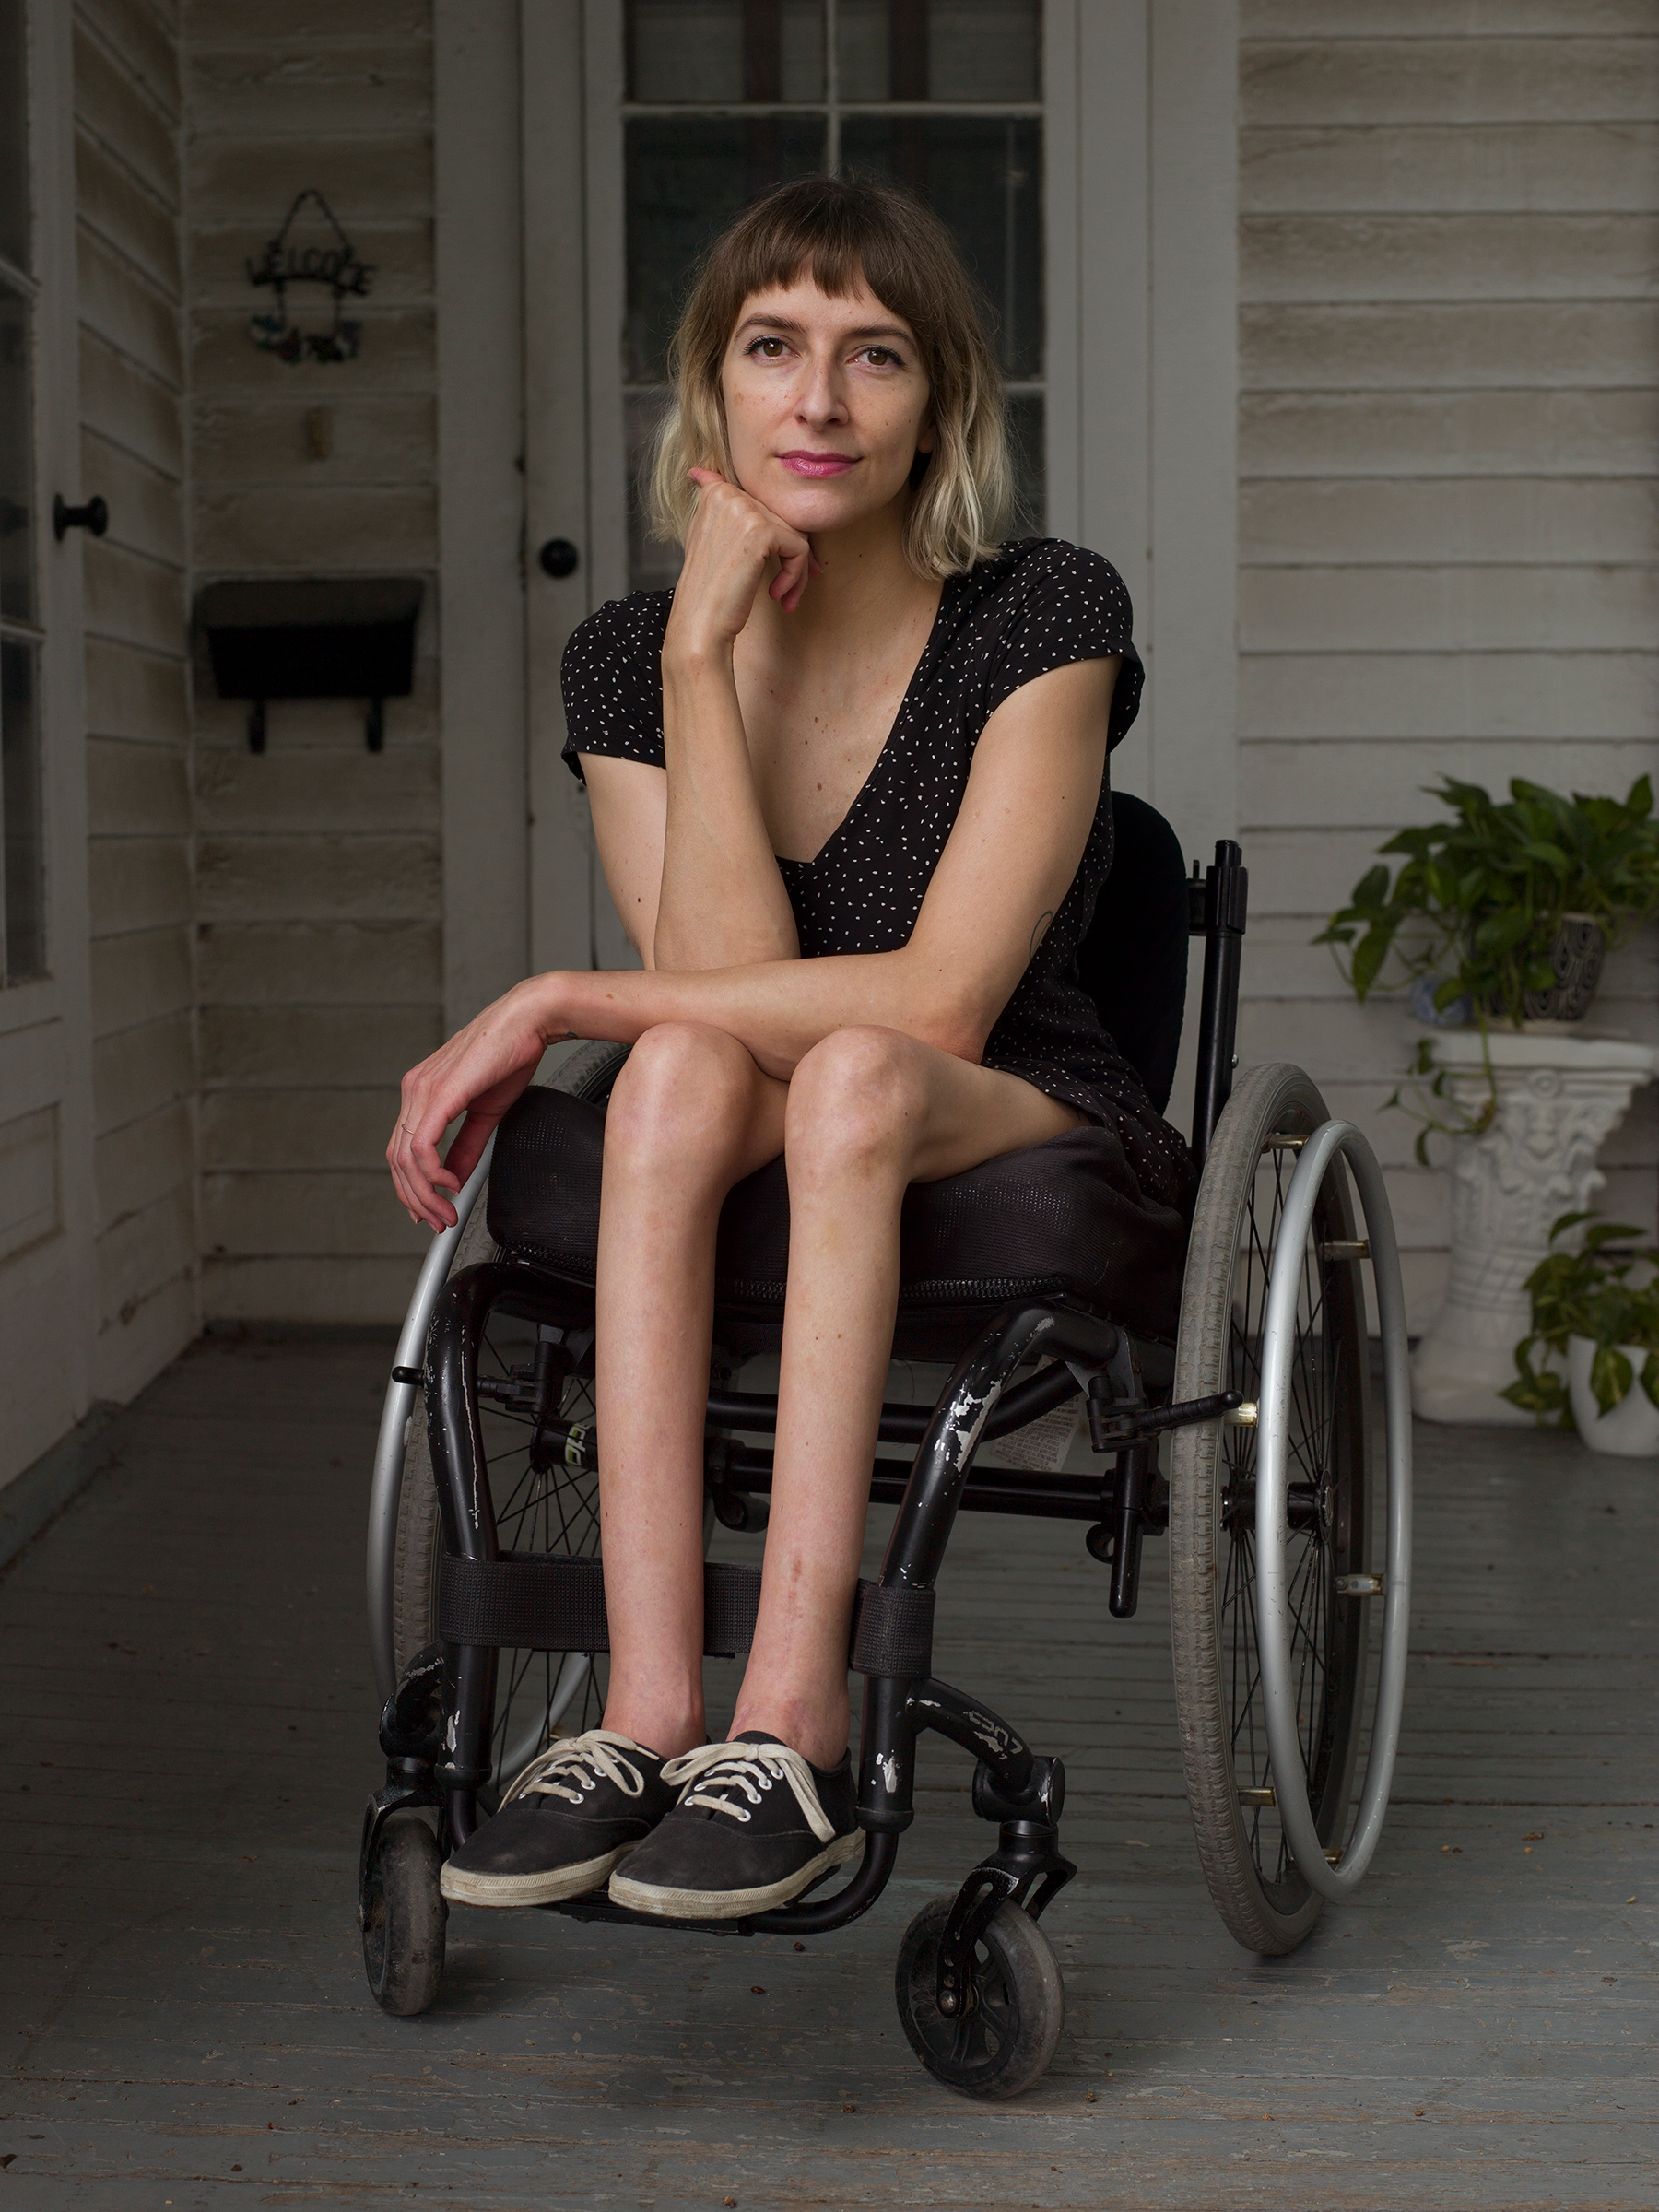 Taussig outside her home in Kansas City, Mo., on Aug. 6 (Jess Dugan for TIME)